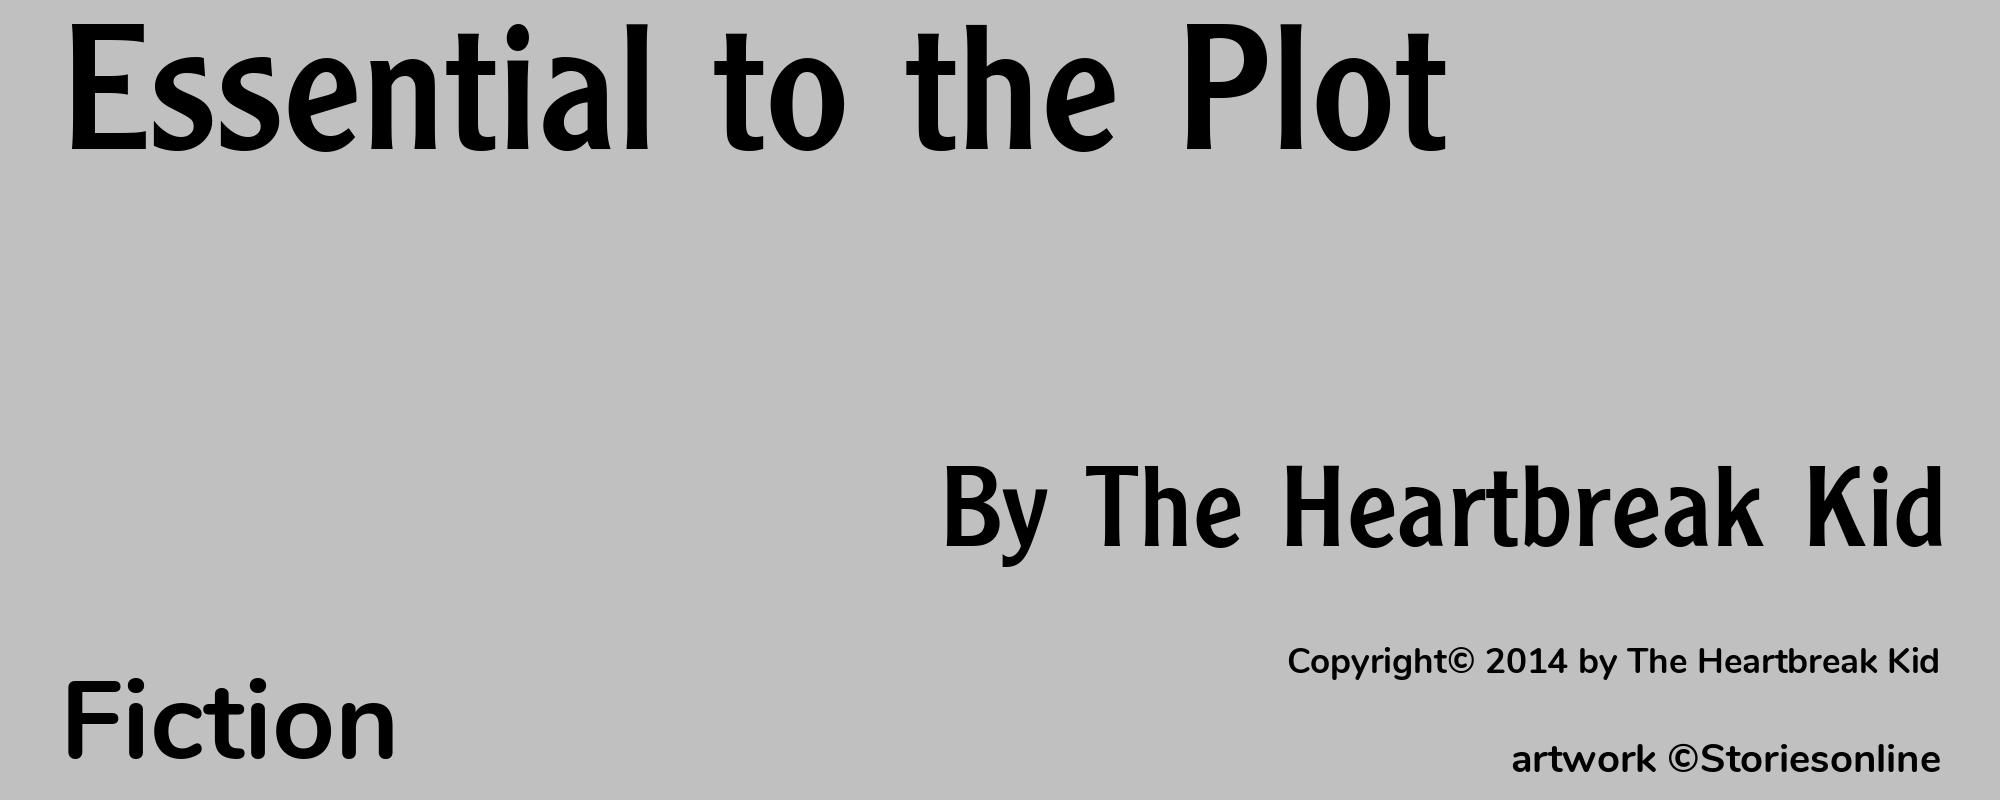 Essential to the Plot - Cover